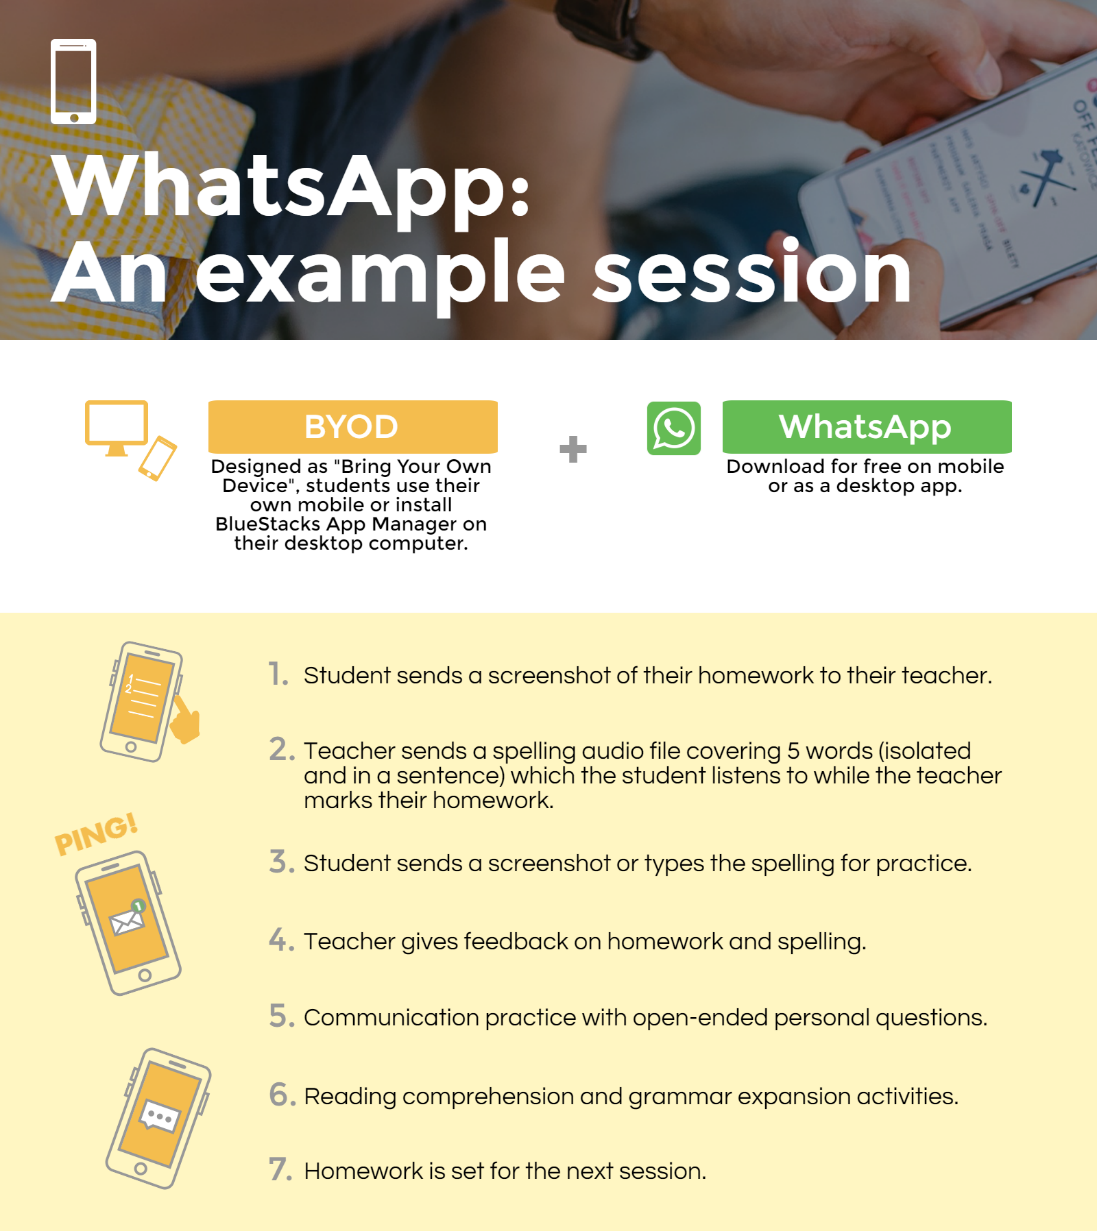 WhatsApp session example